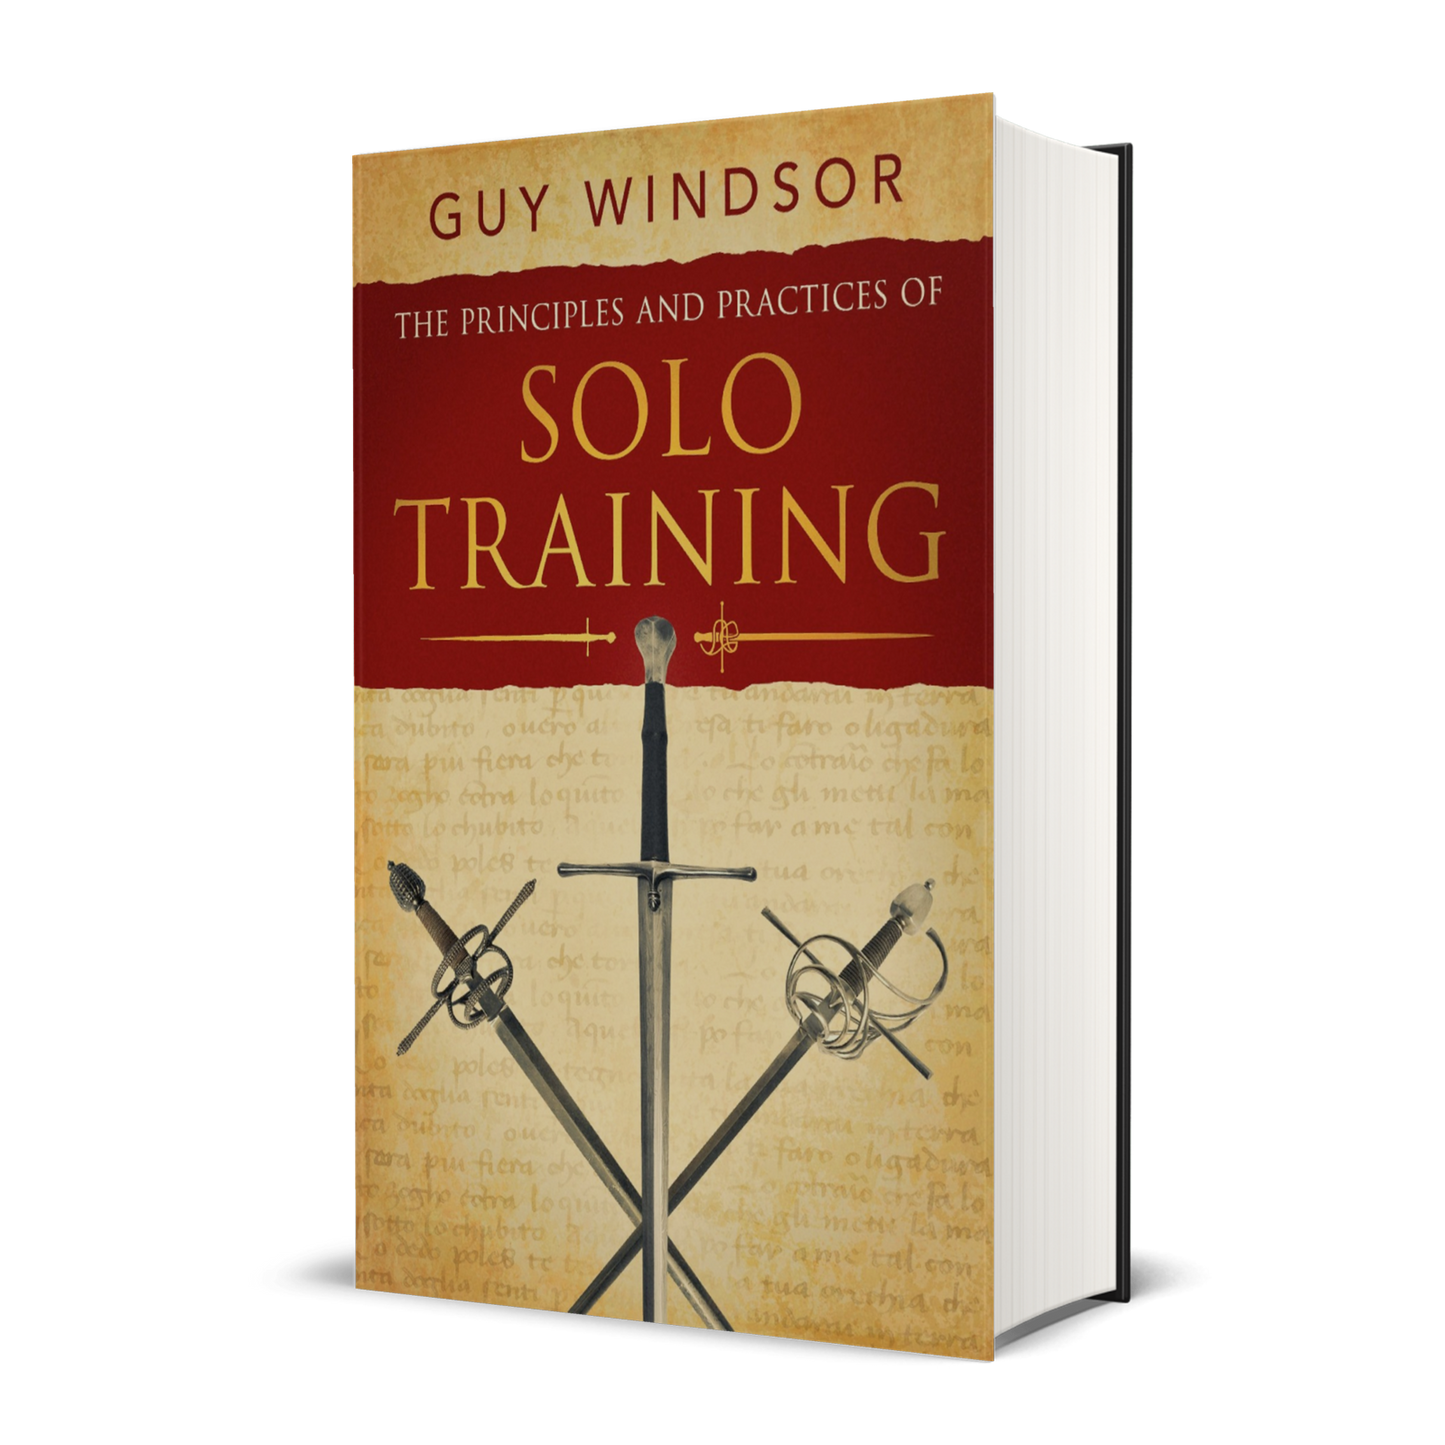 The Principles and Practices of Solo Training: A Guide for Historical Martial Artists, Sword People, and Everyone Else (Hardback)